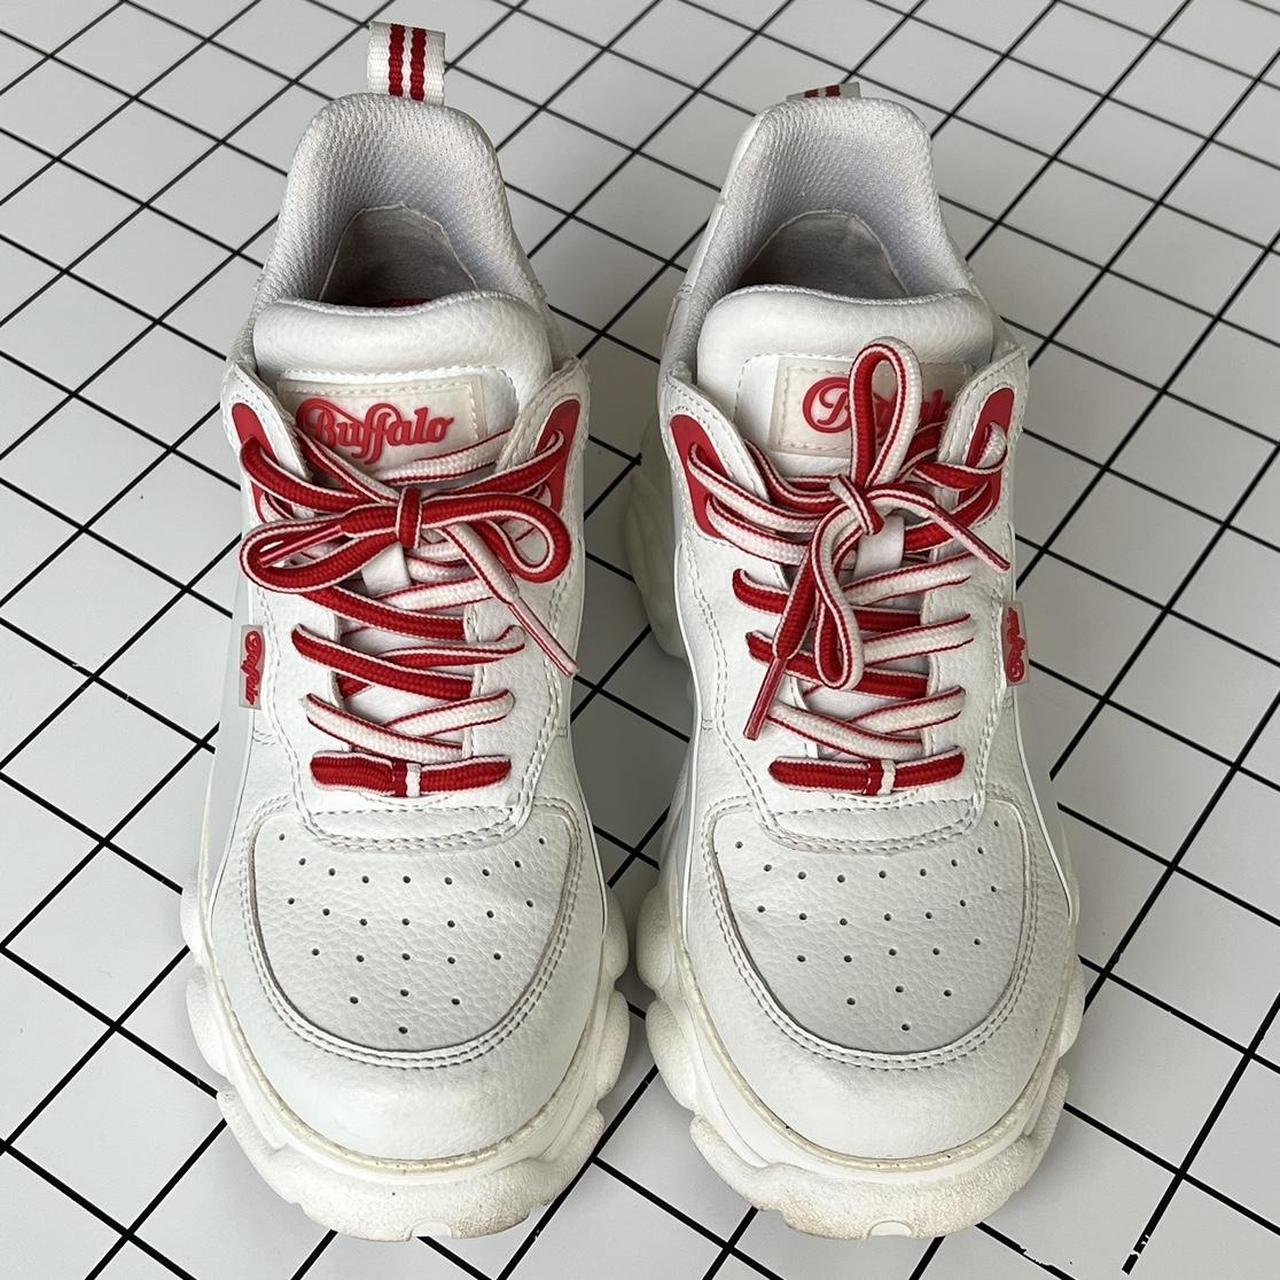 Buffalo London Women's Red and White Trainers